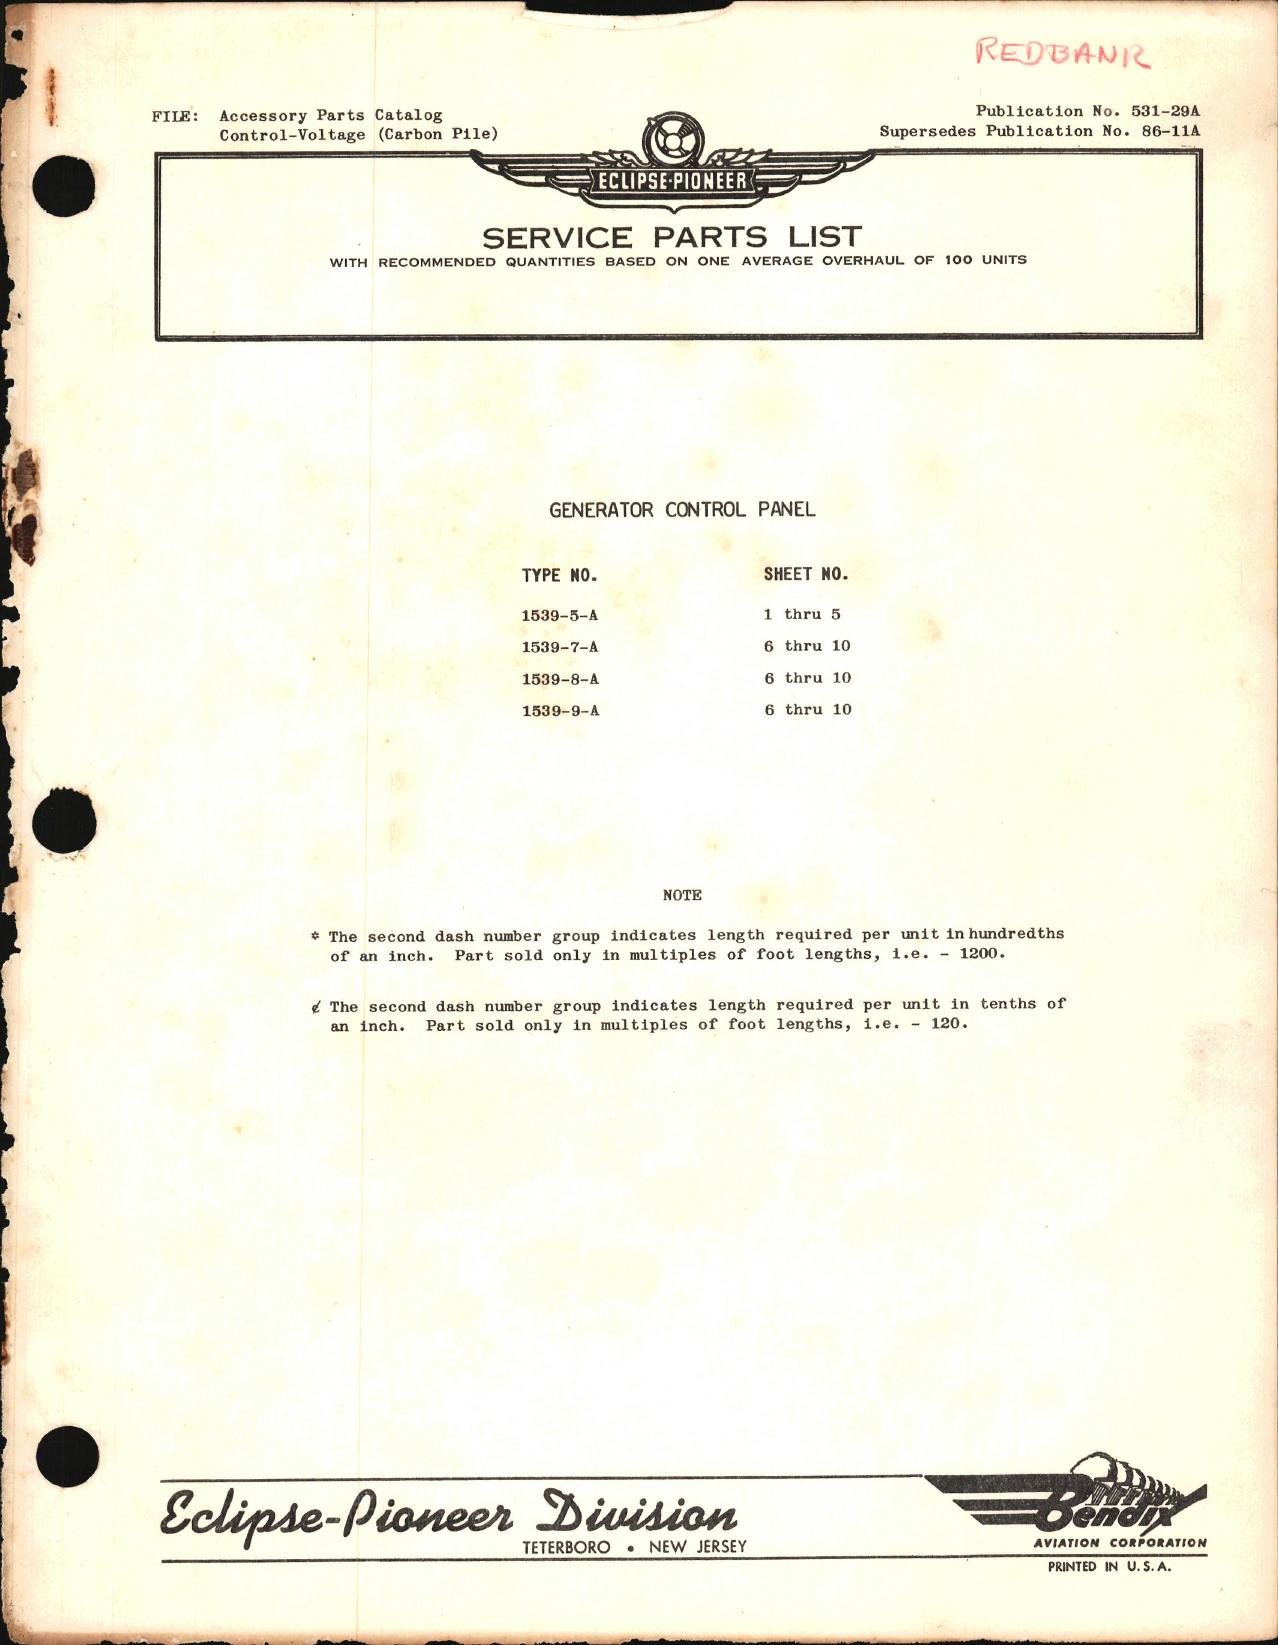 Sample page 1 from AirCorps Library document: Service Parts List for Generator Control Panel Type 1539-5, -7, -8, and -9